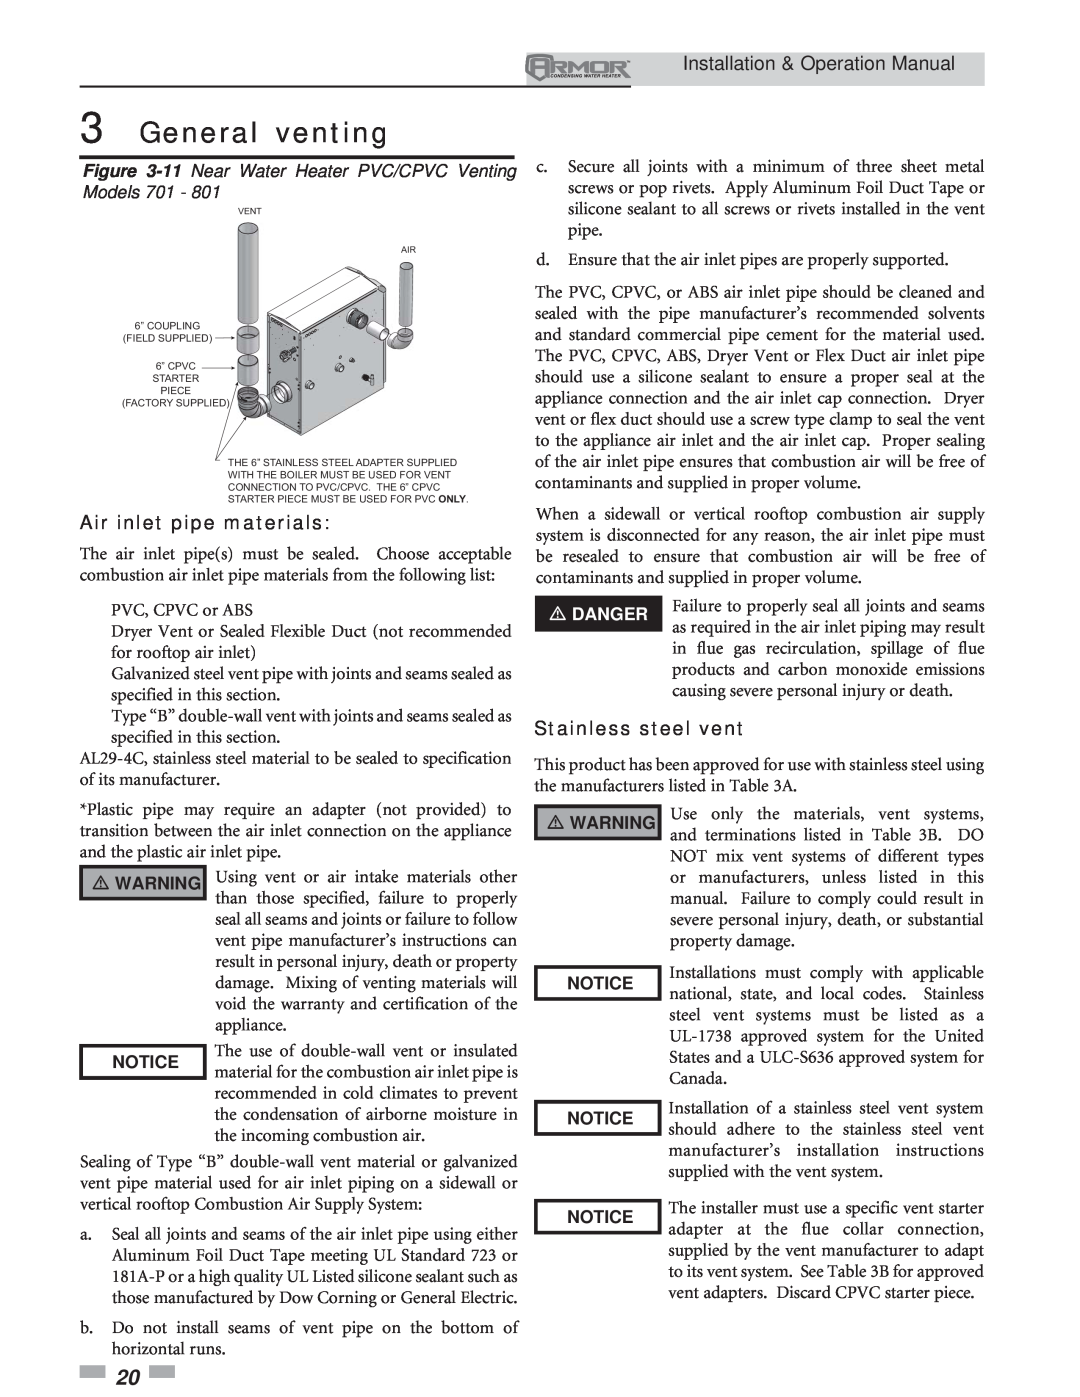 Lochinvar 151 Air inlet pipe materials, Stainless steel vent, General venting, Installation & Operation Manual, Danger 